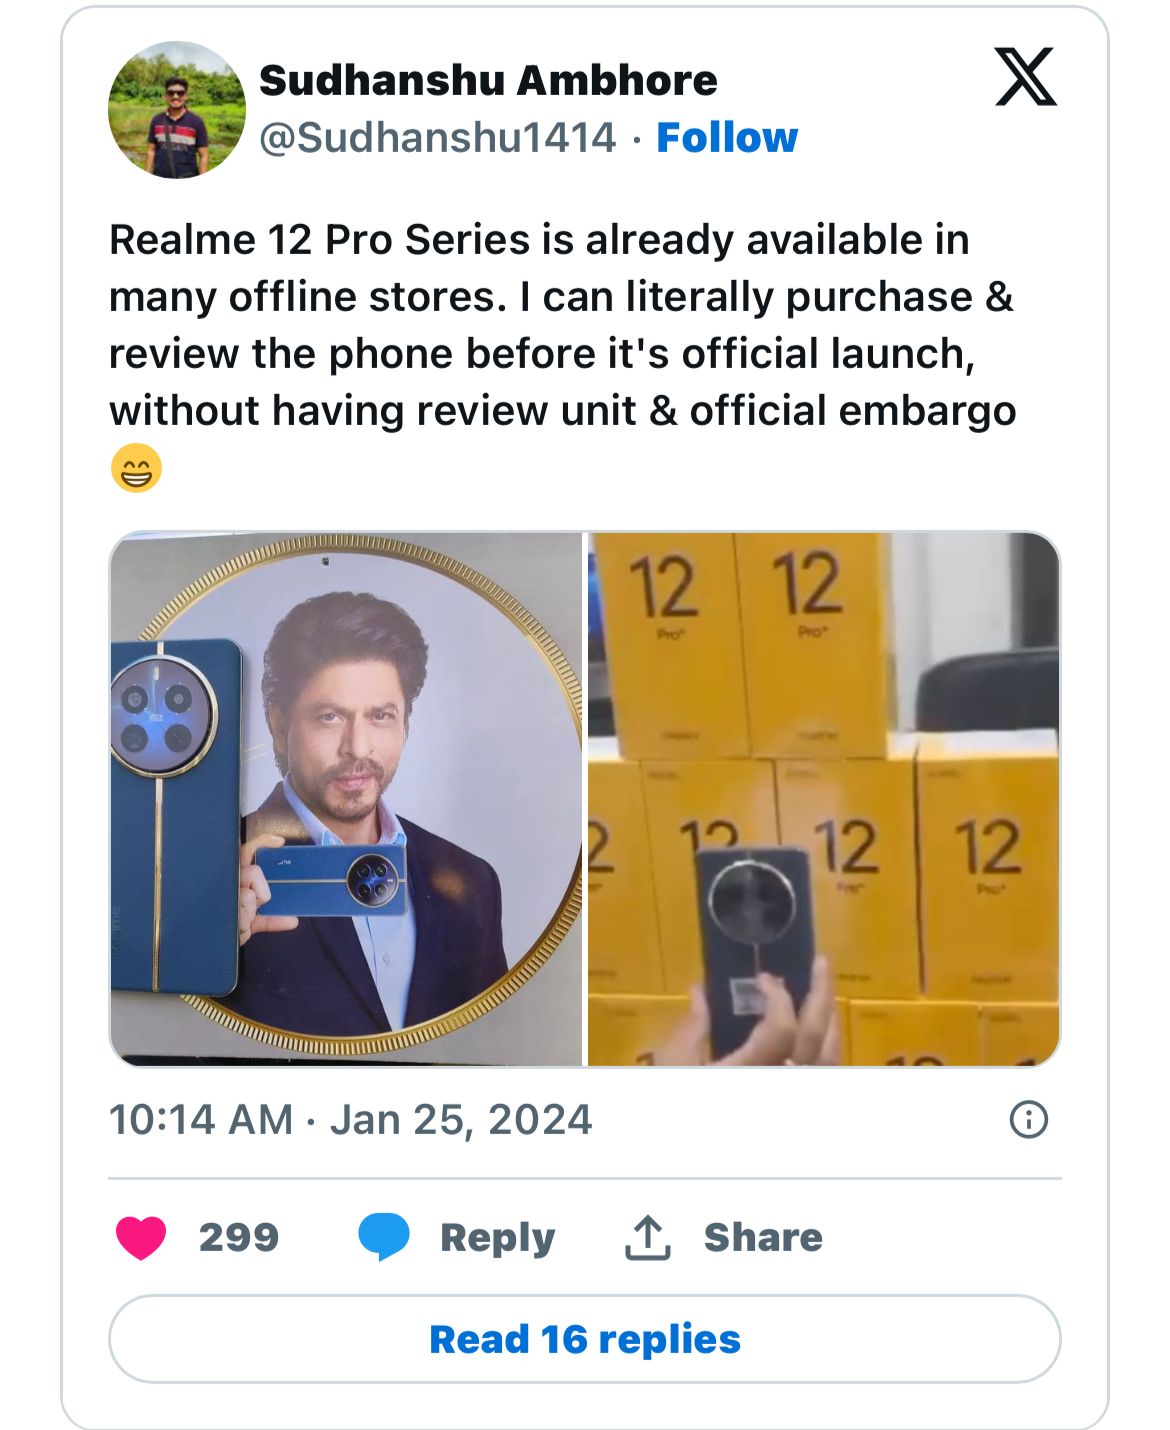 Realme 12 Pro+ is anticipated to come with attractive introductory launch offers